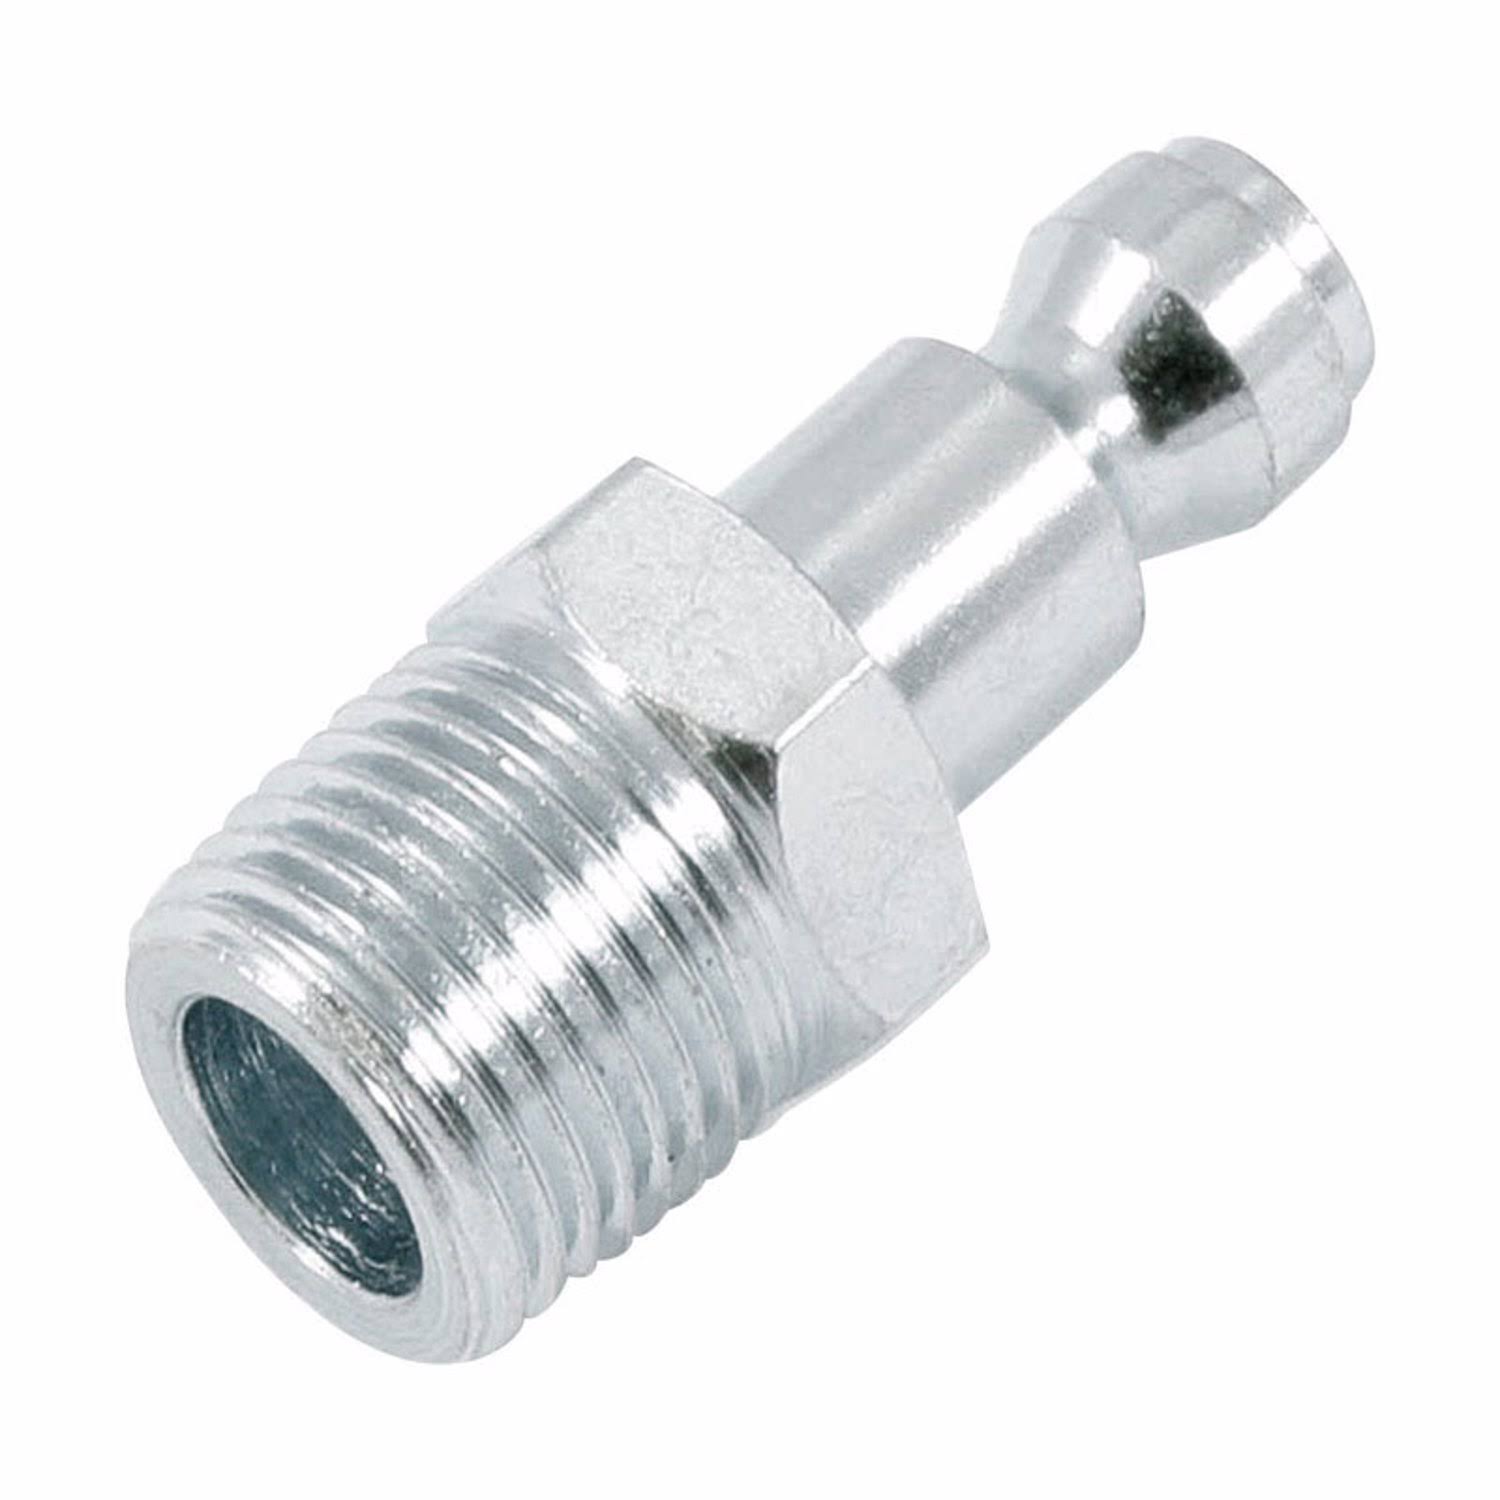 Forney 75399 Tru-Flate Compatible Air Fitting Plug, 1/4" x 3/8" Male NPT